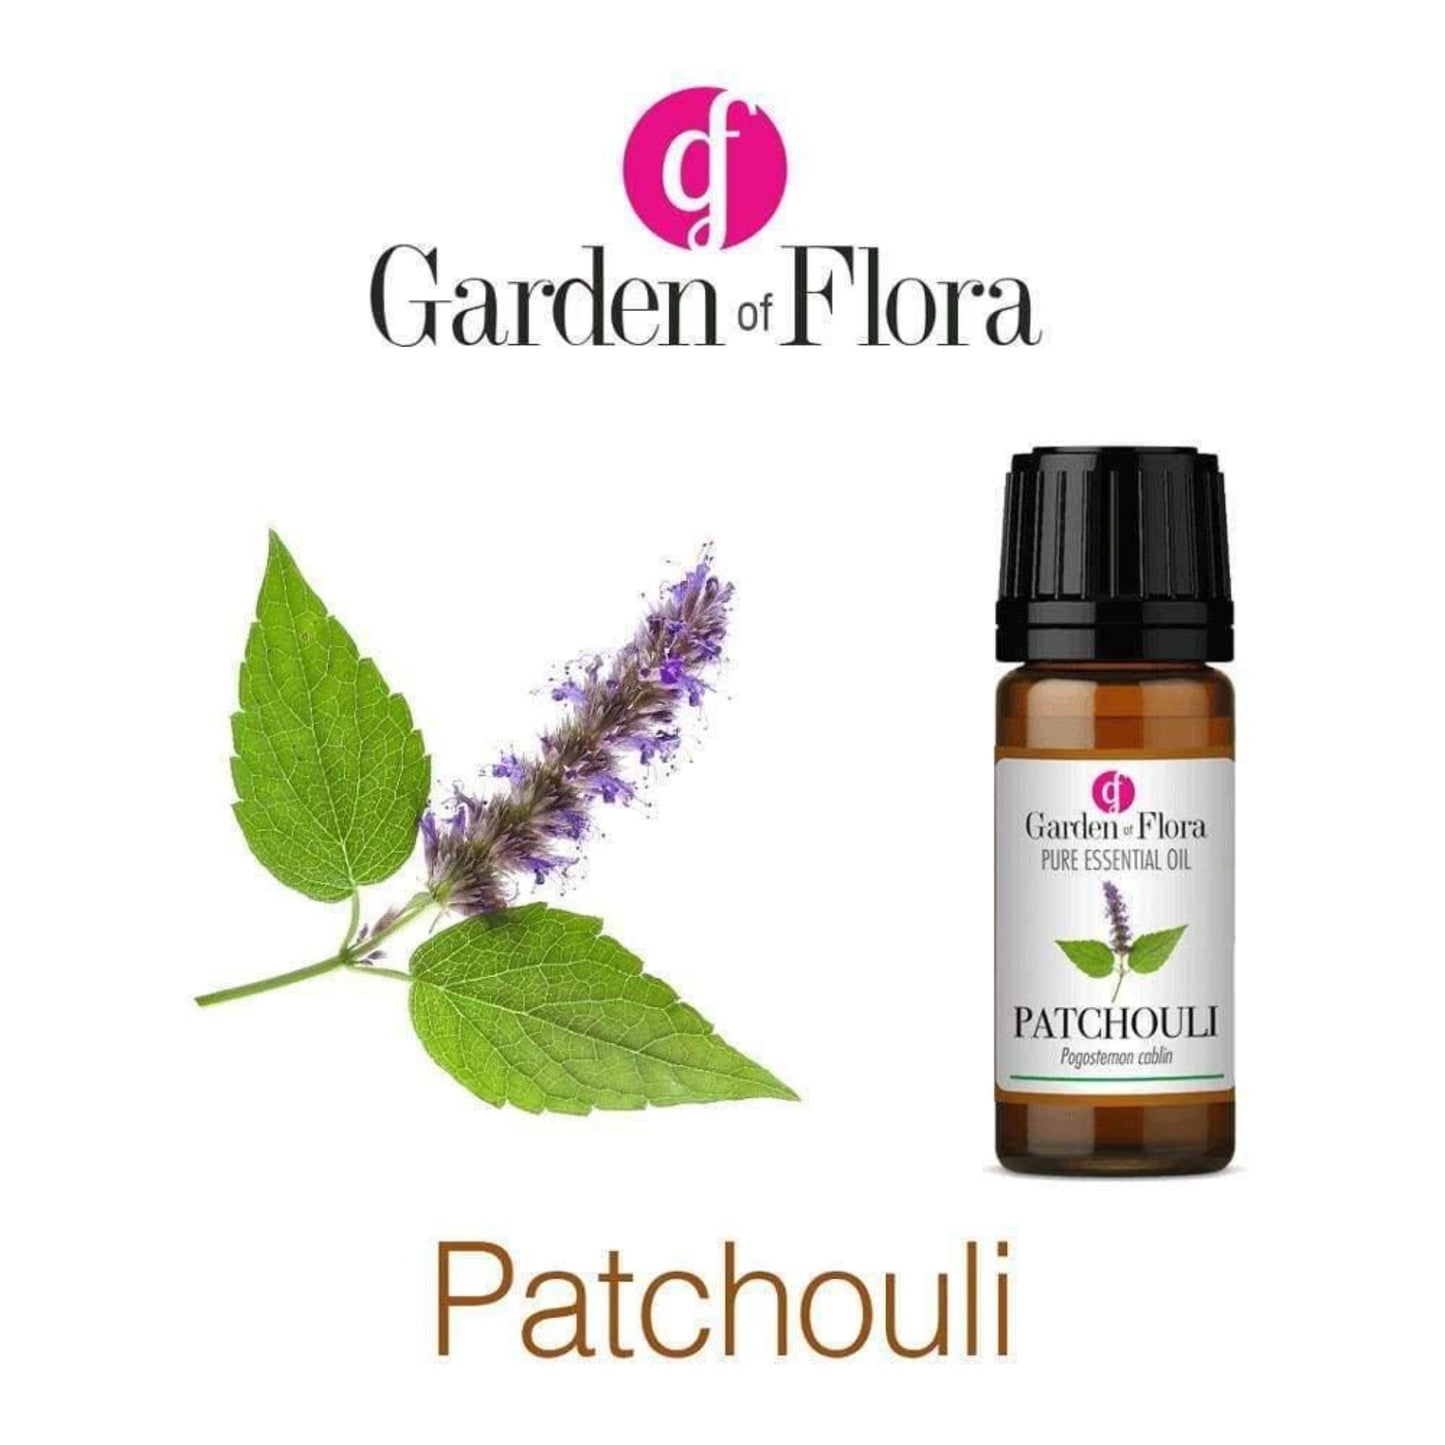 A patchouli flower next to a bottle ofPatchouli 10ml Essential Oil